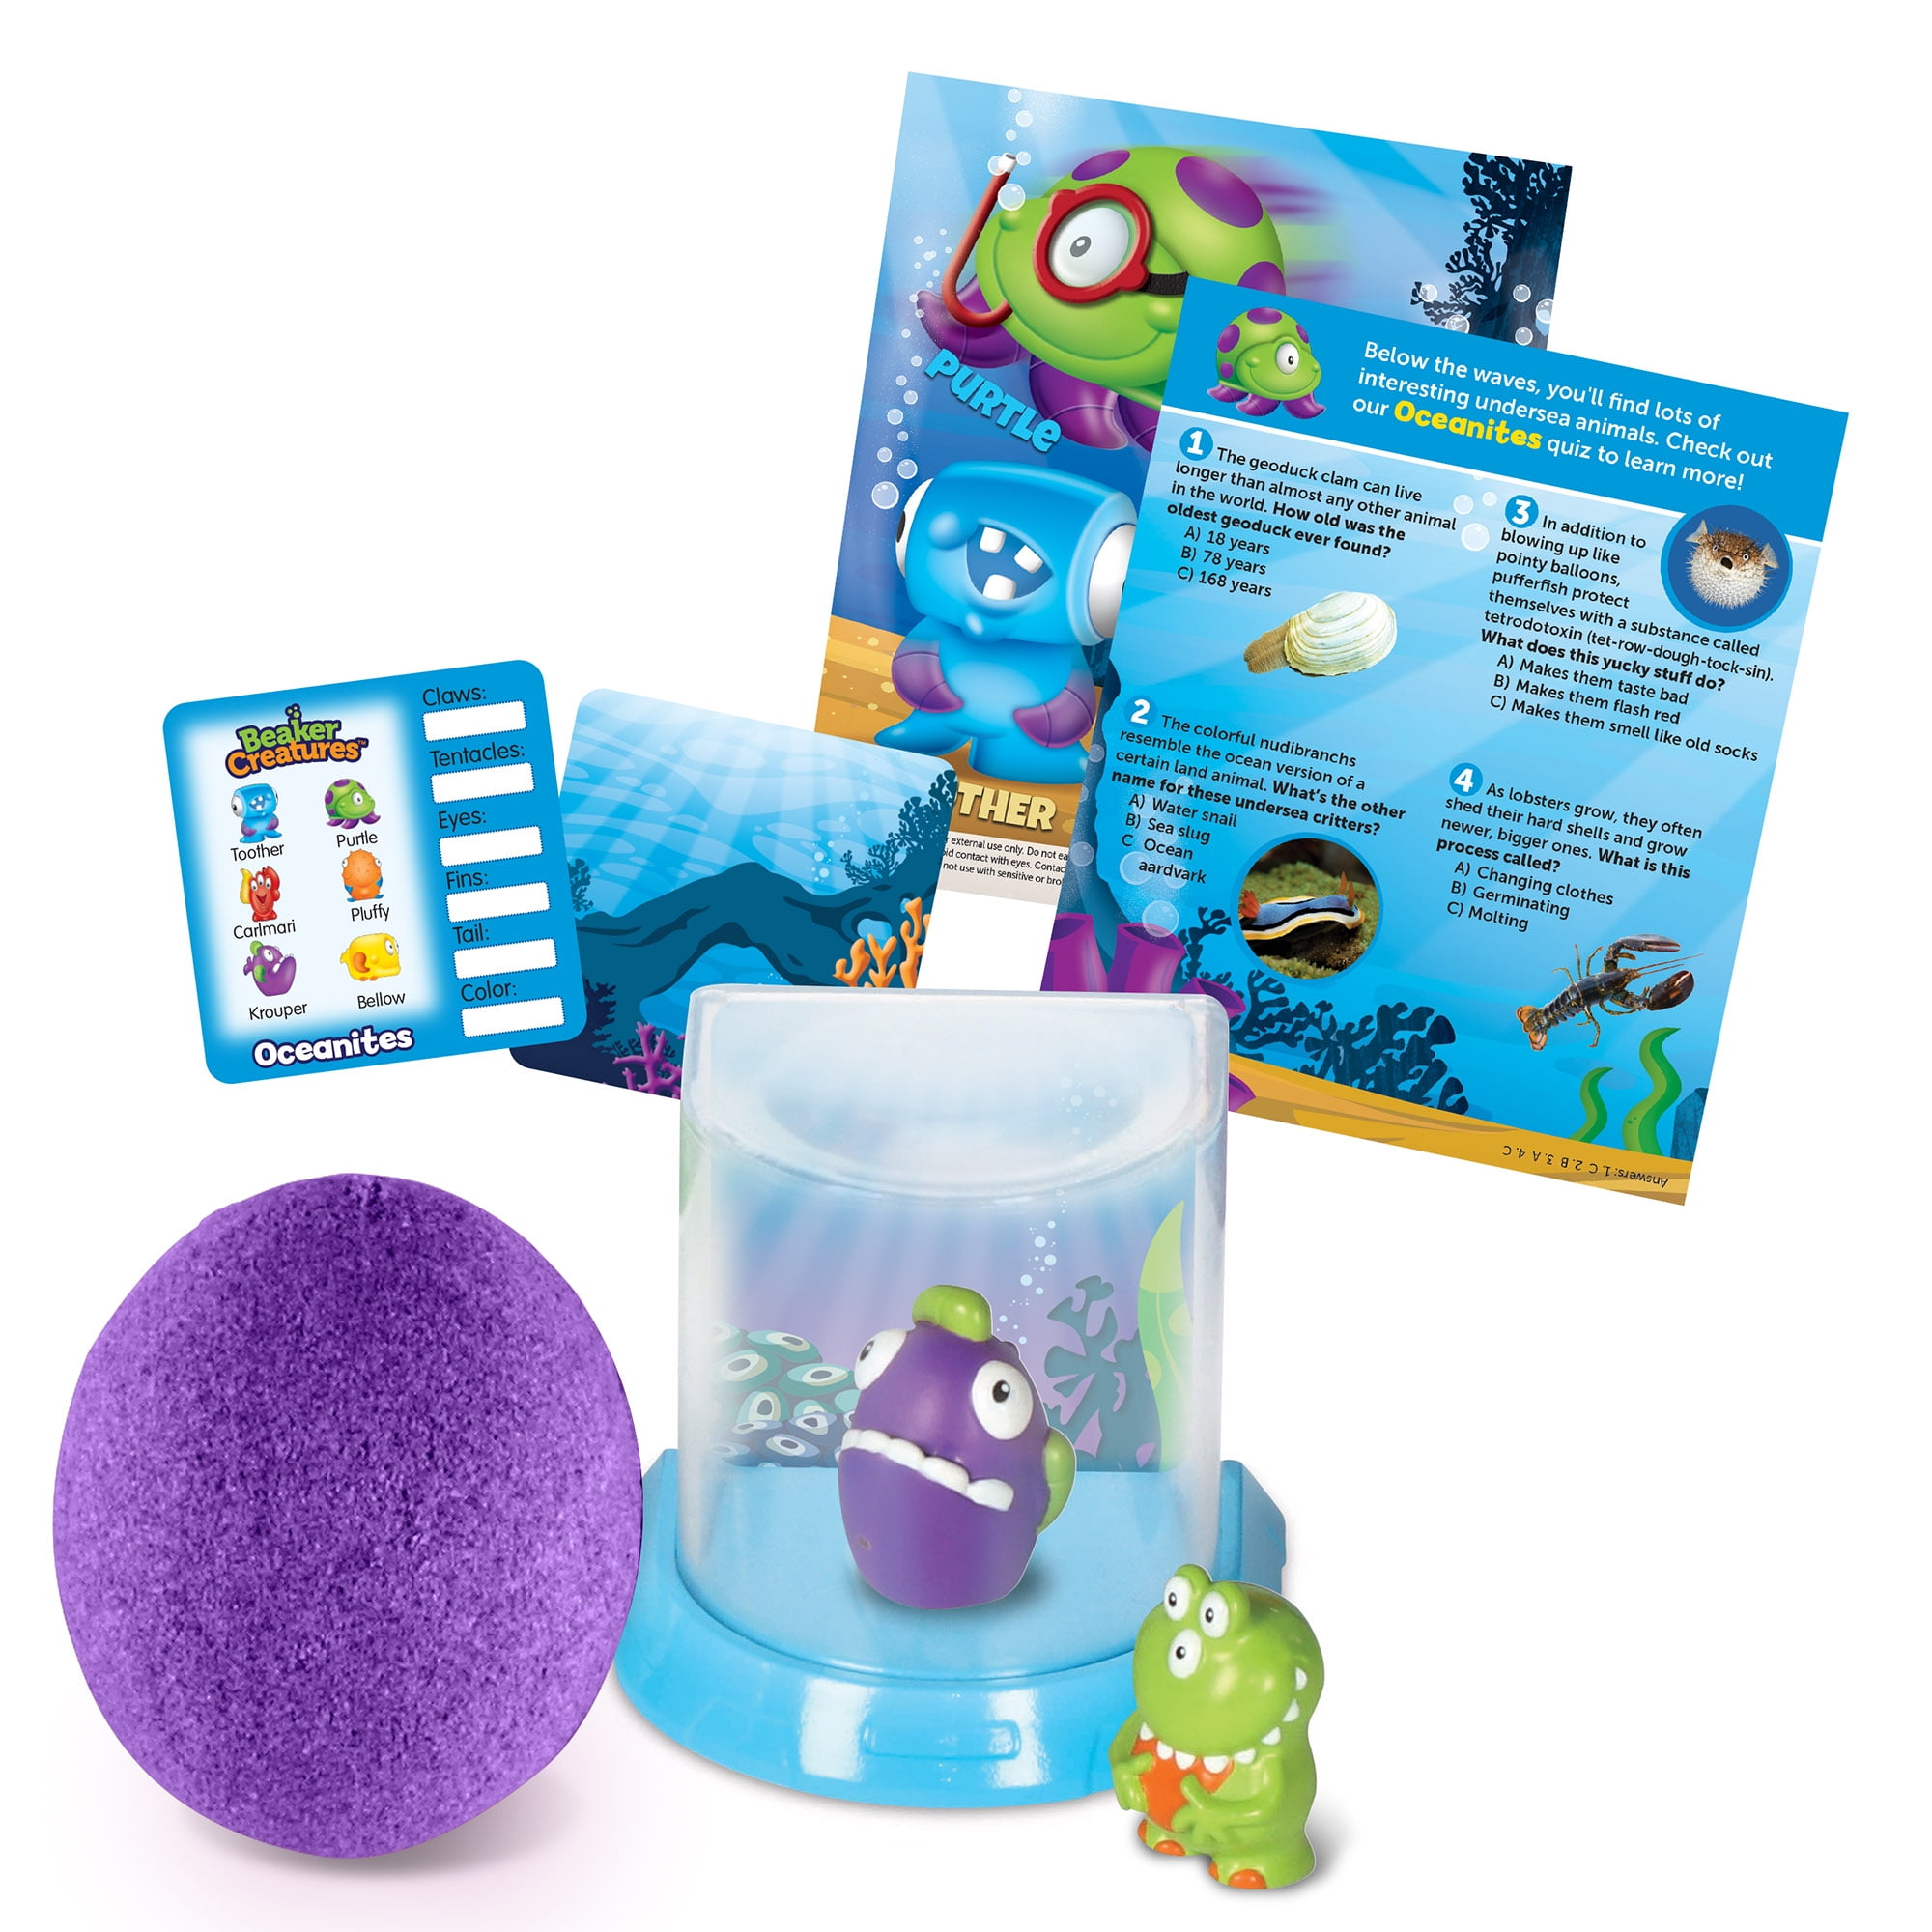 Learning Resources Beaker Creatures Magnification Chamber Education Fun Science 